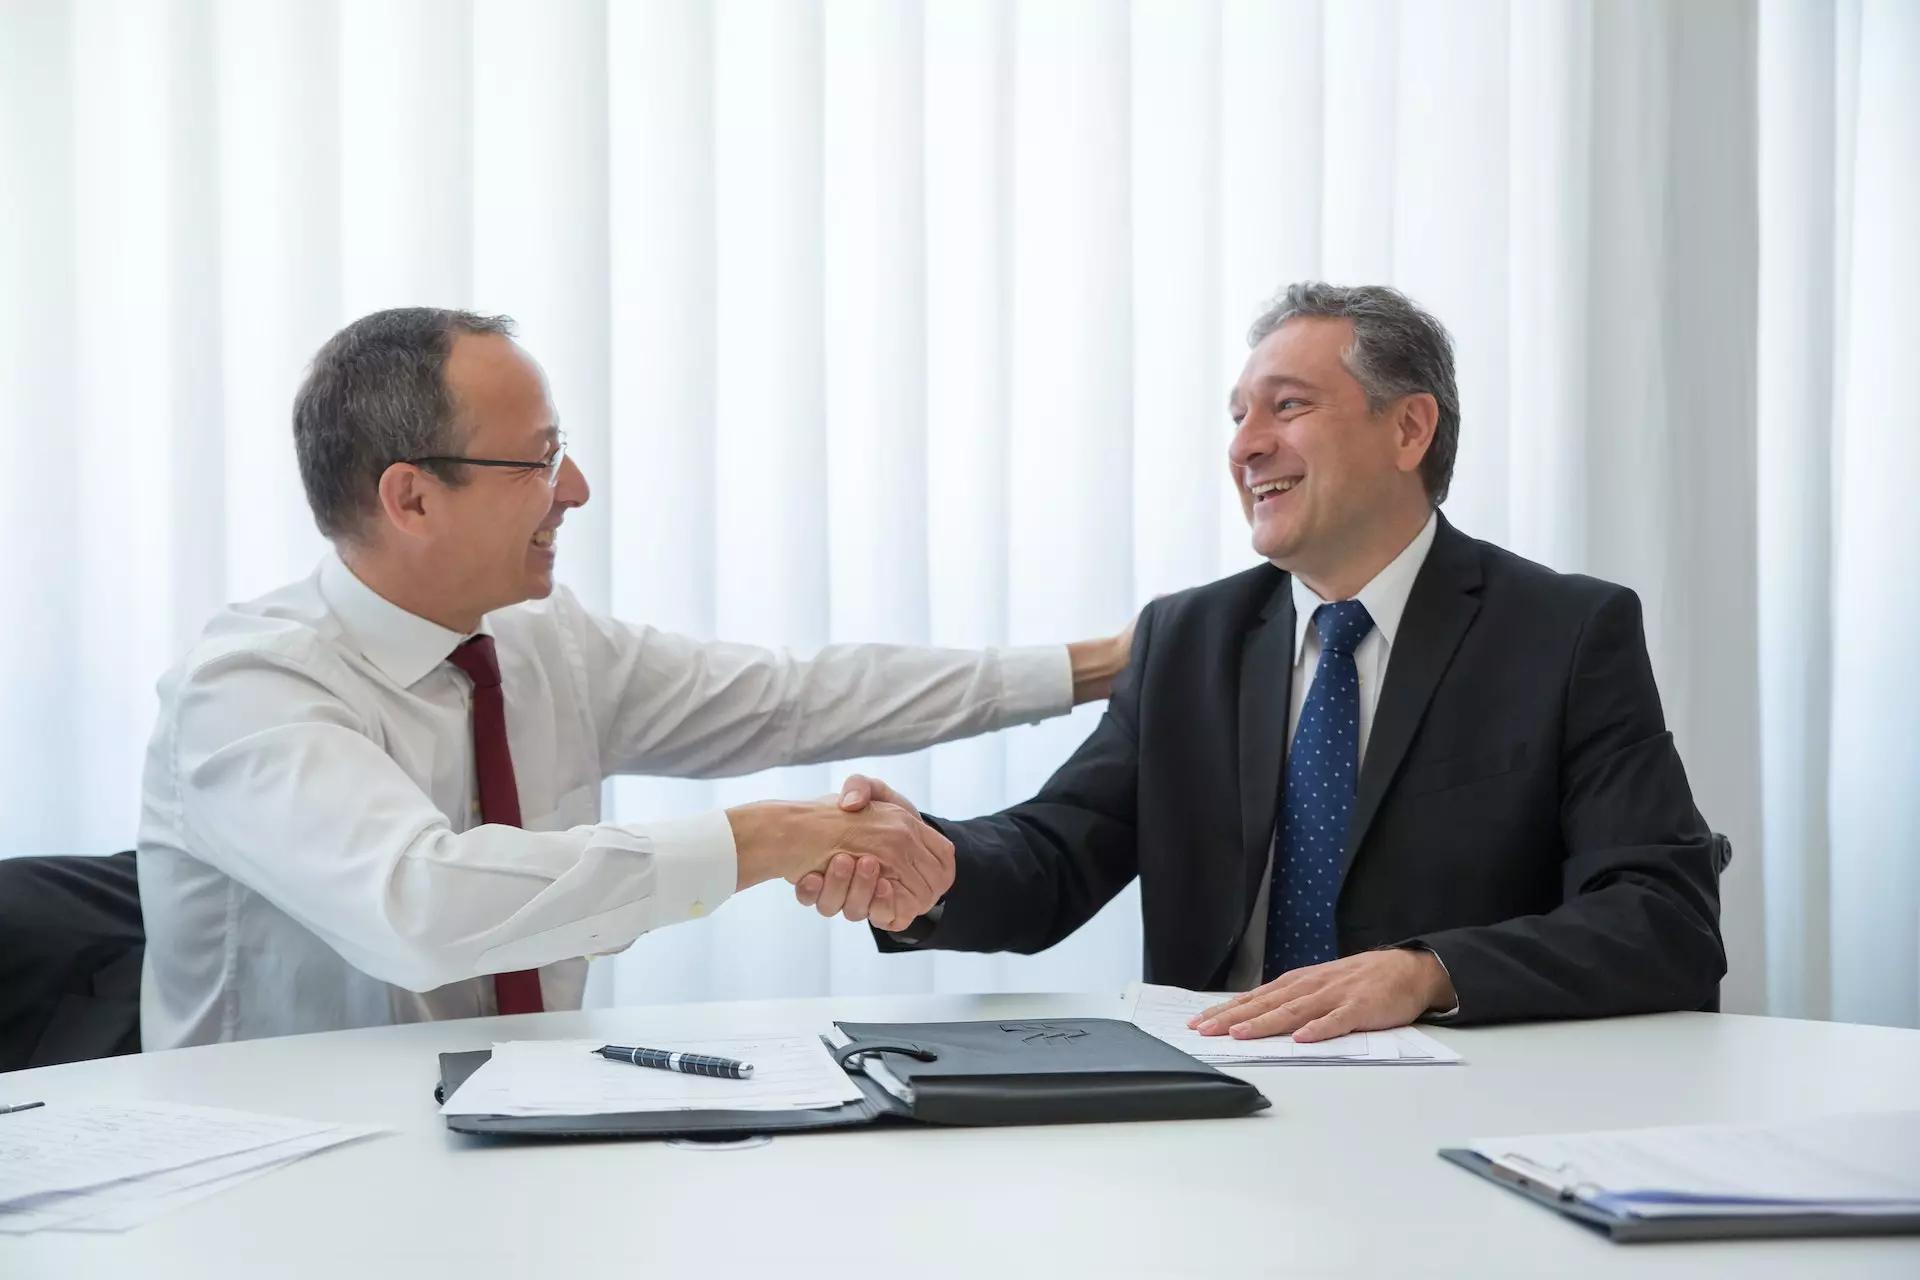 two men at a table in an office setting shake hands